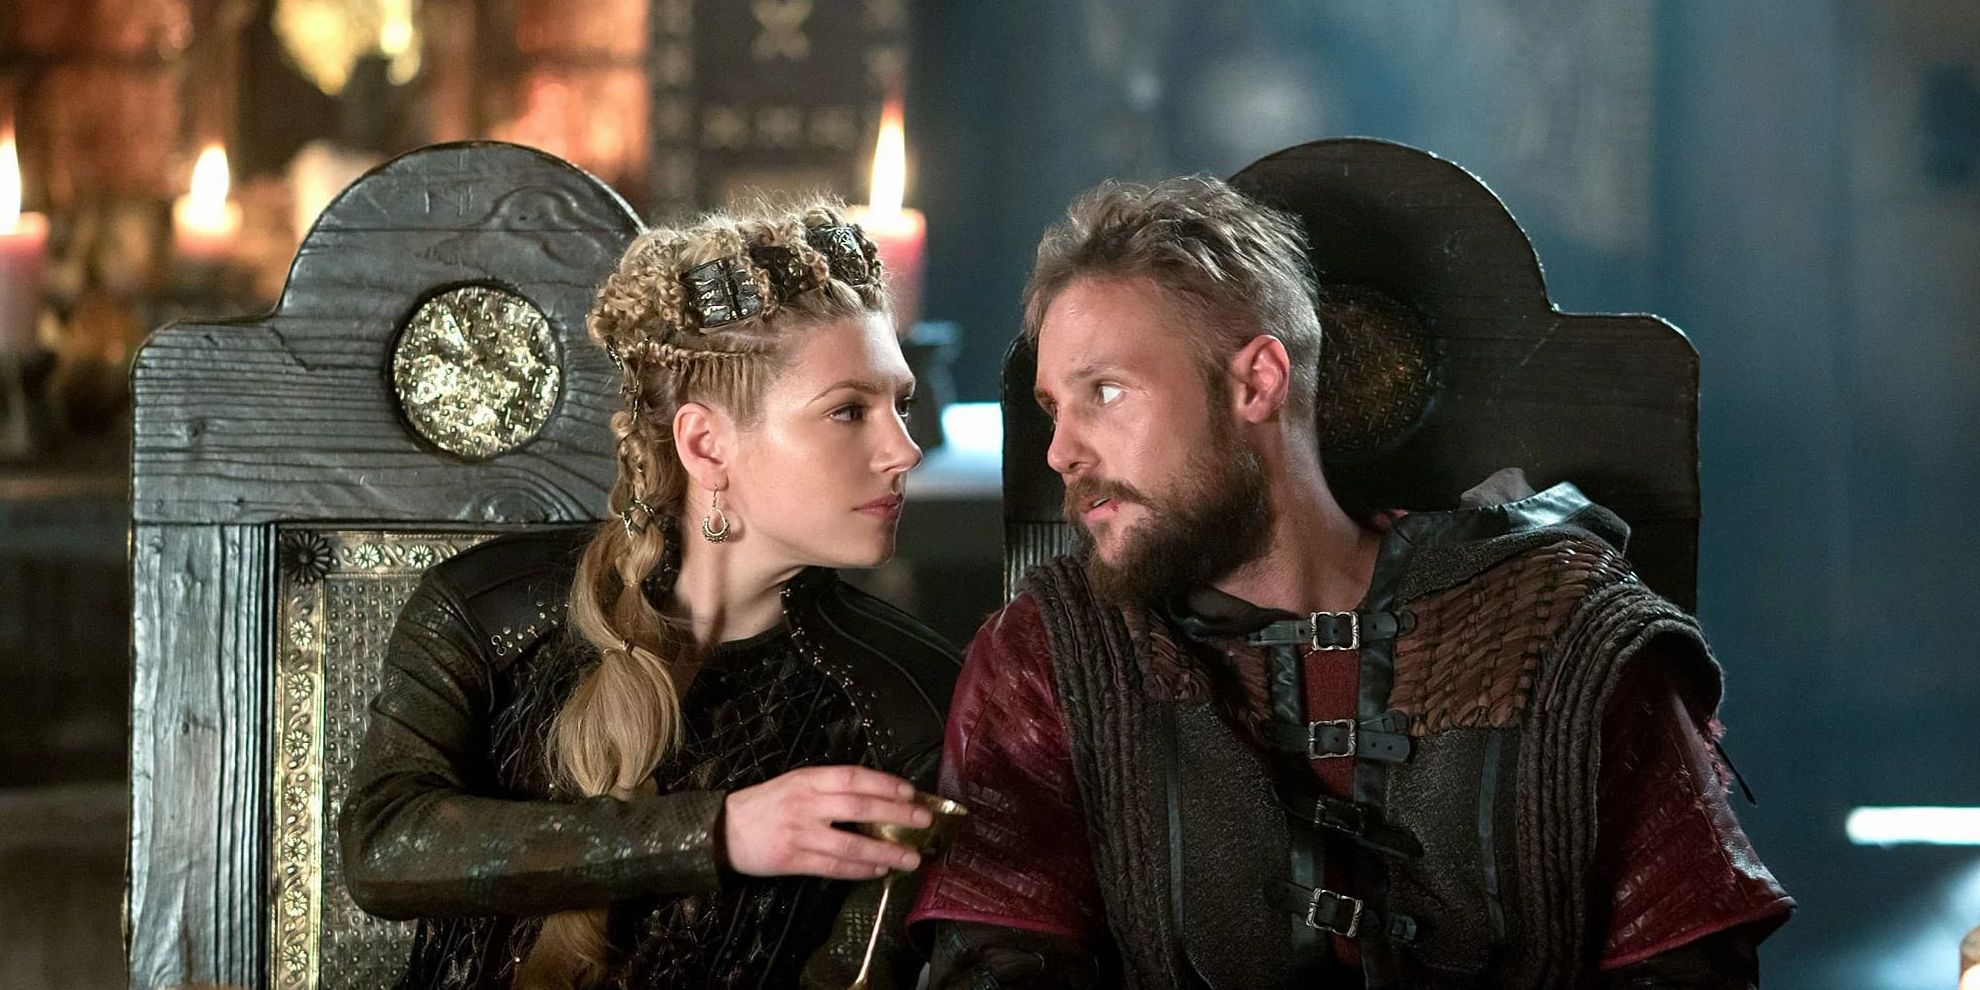 Lagertha and Ubbe toast to their new alliance against Ivar.